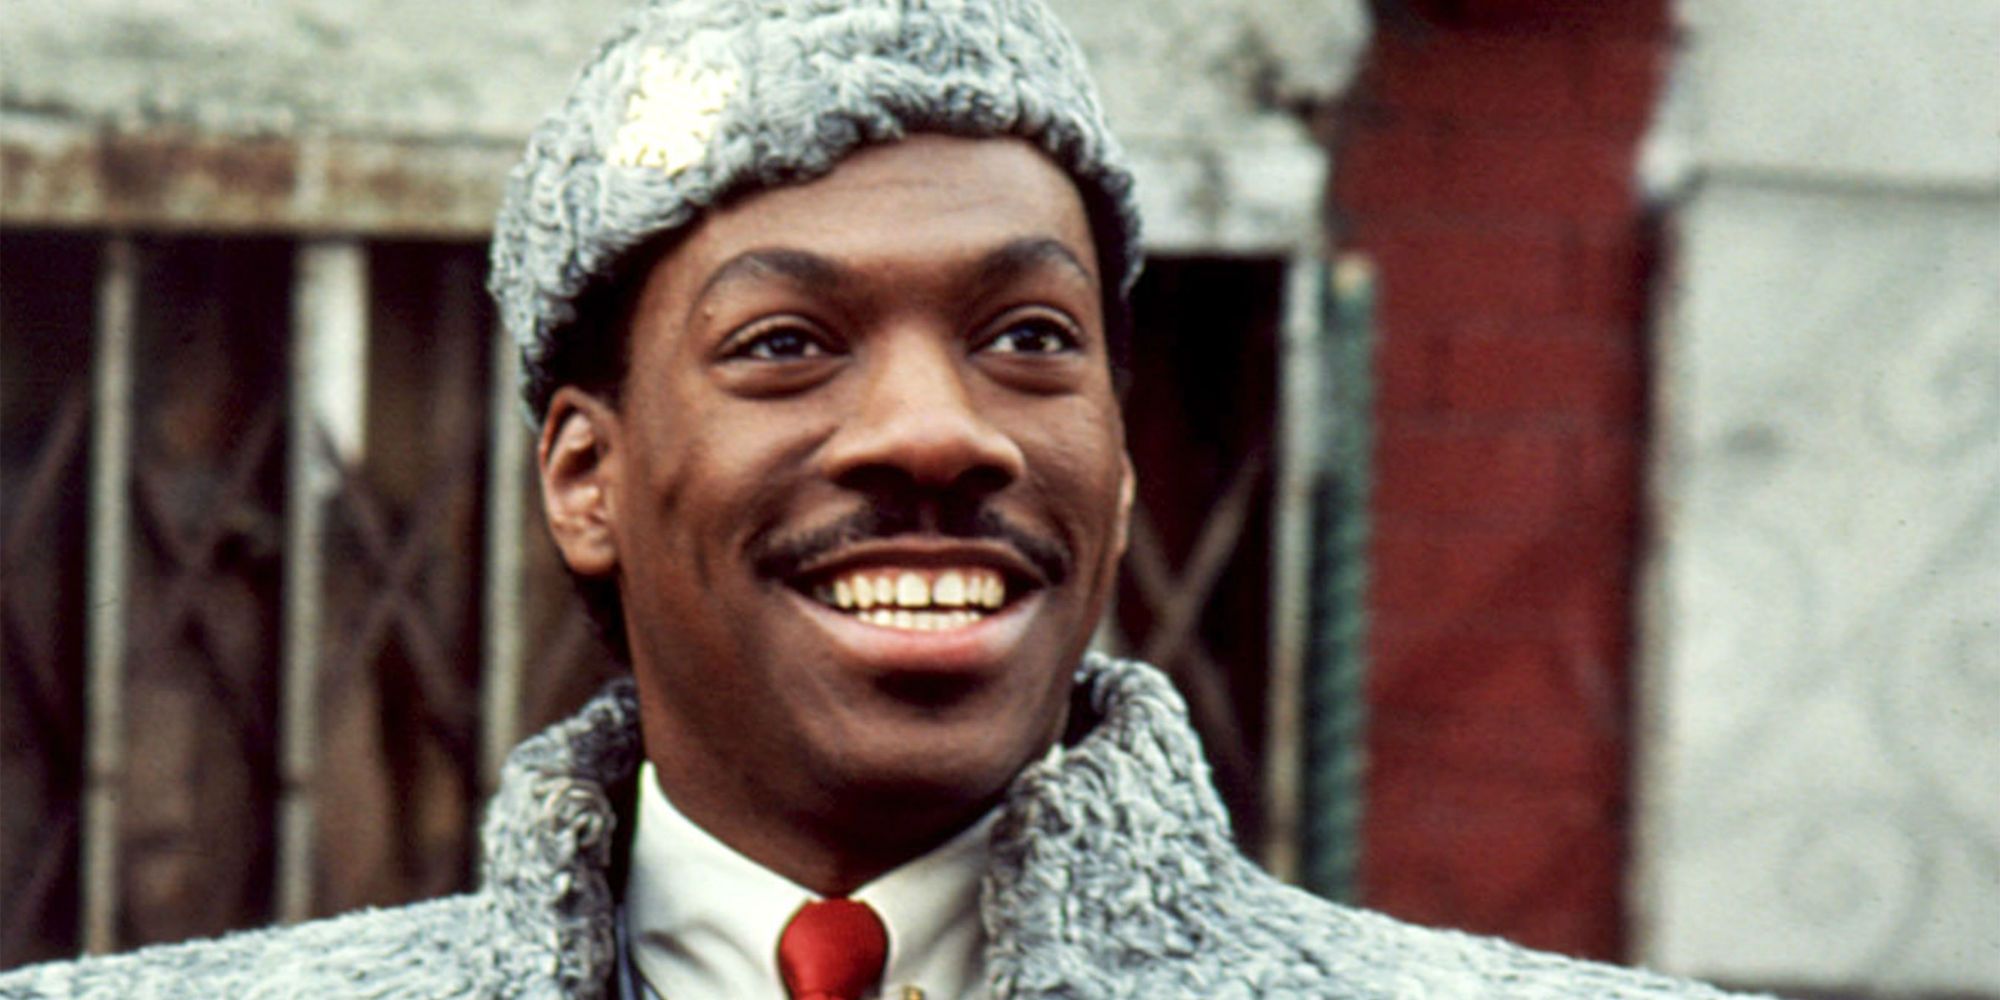 Eddie Murphy's Coming To America Sequel Sets 2020 Release Date